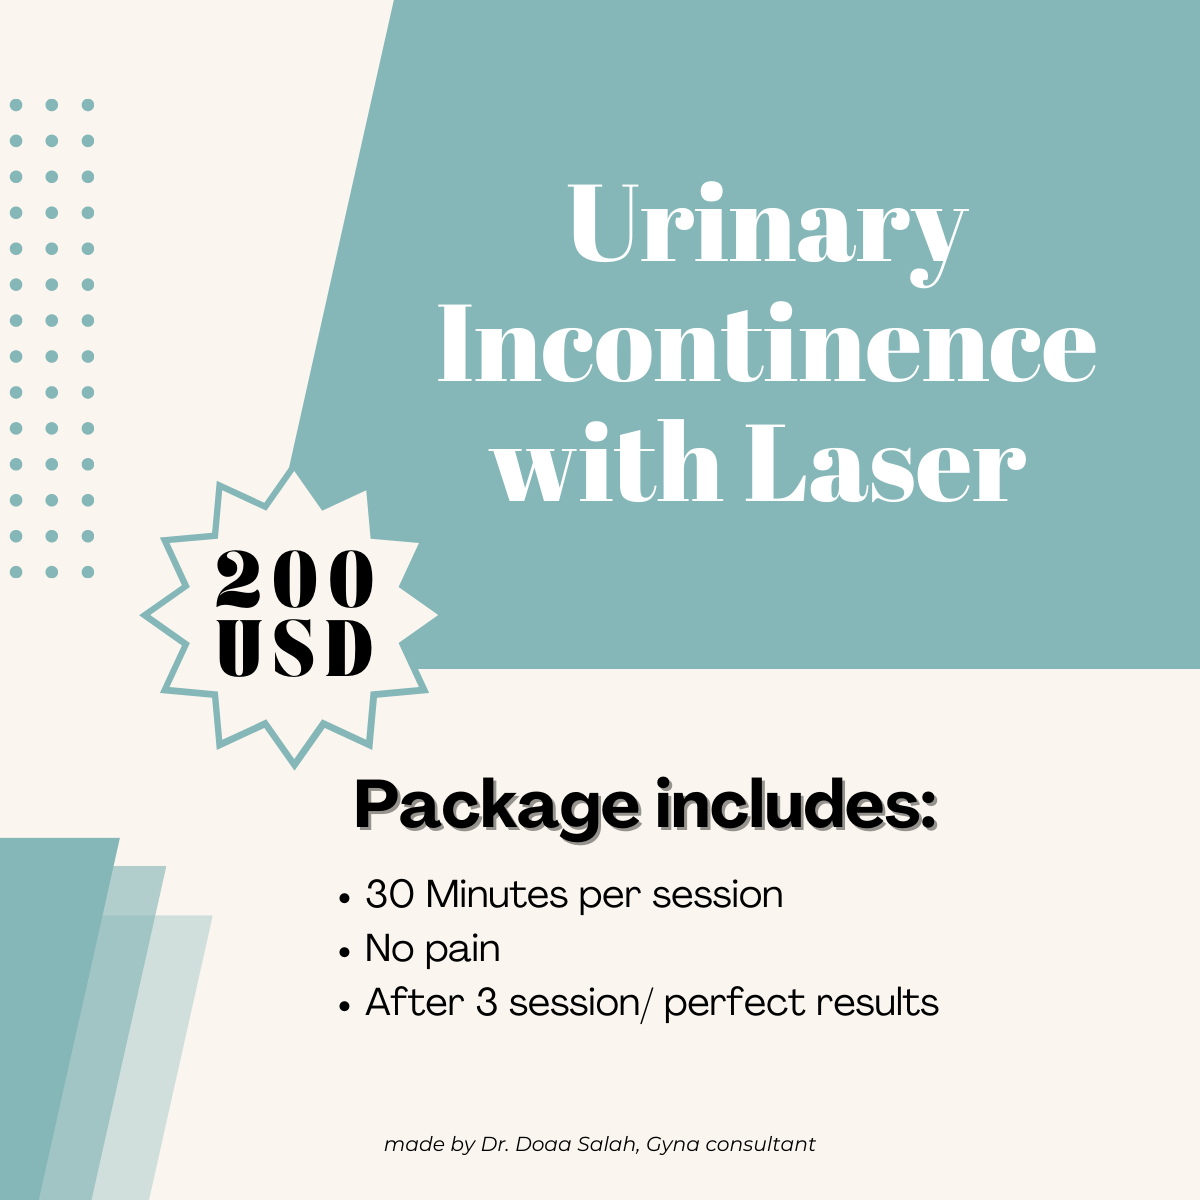 Urinary Incontinence (Laser)